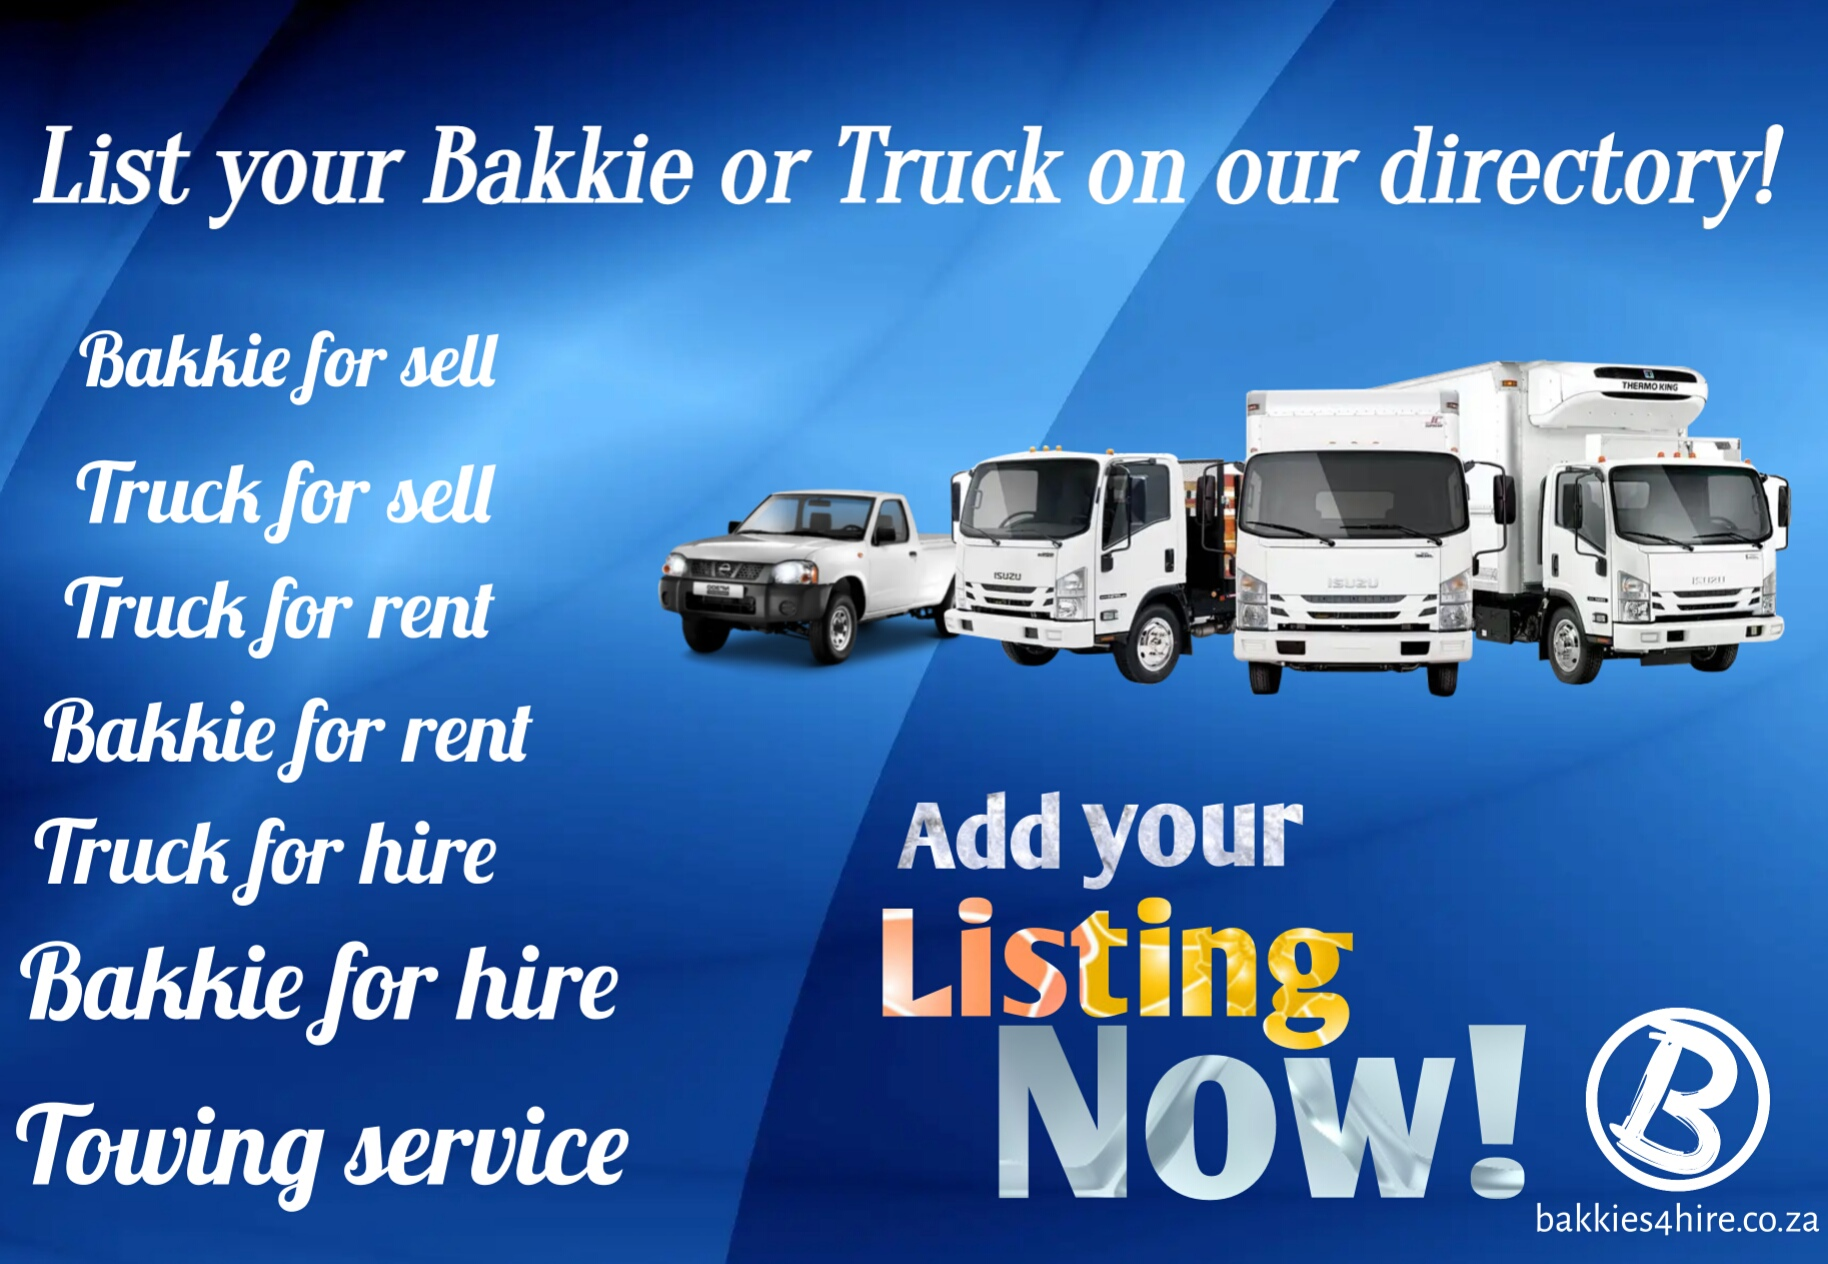 List your bakkie or truck at https://bakkies4hire.co.za/add-listing/